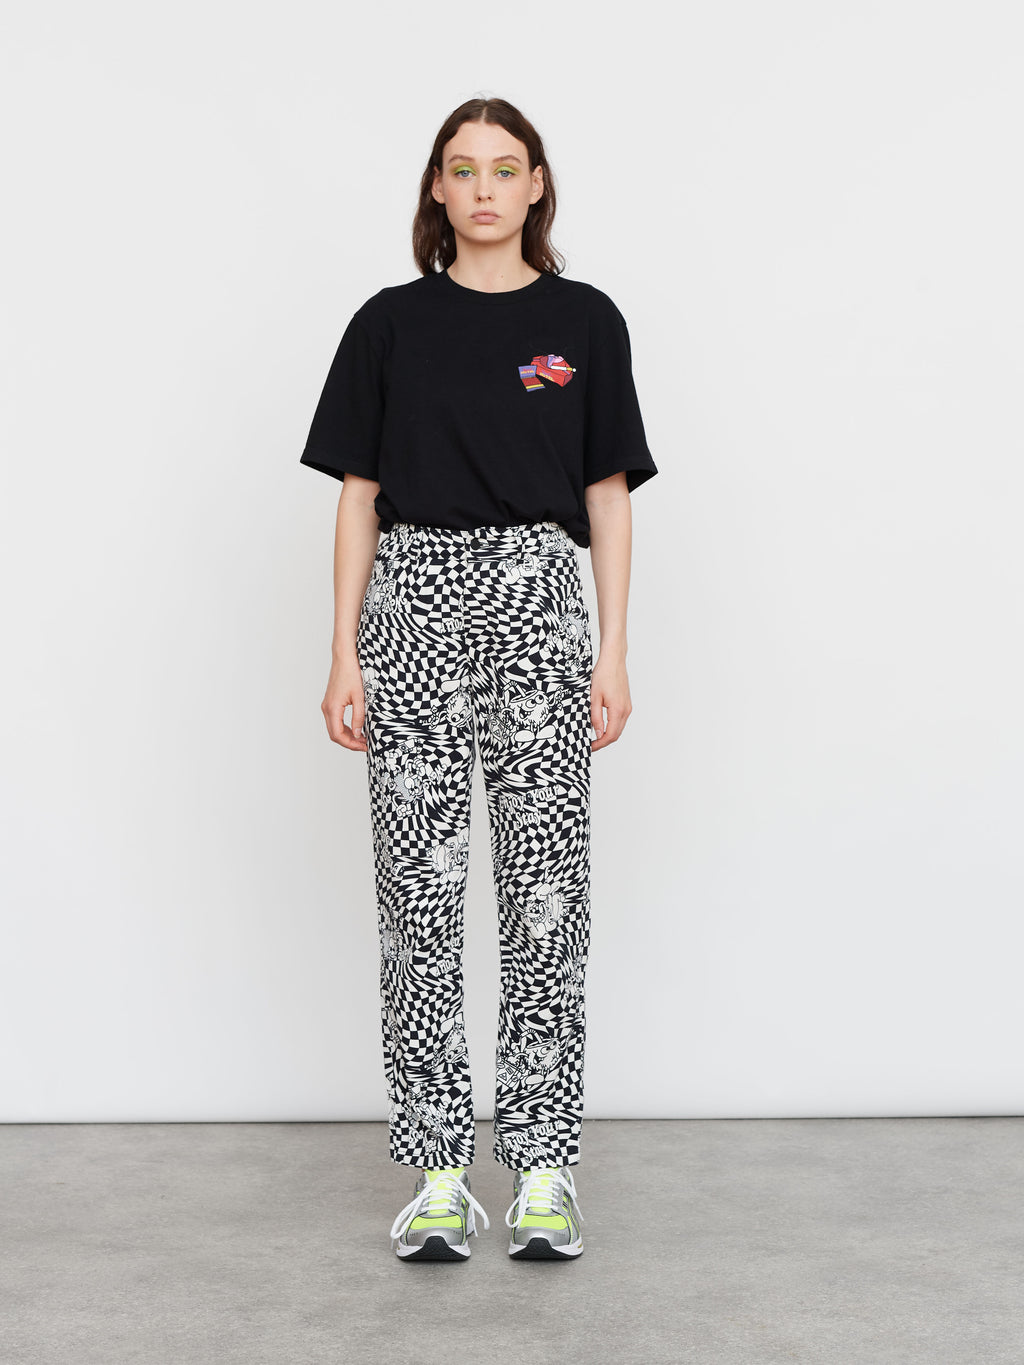 collection-lazy-hotel-1, collection-womens-trousers, collection-women-new-in-1, collection-women